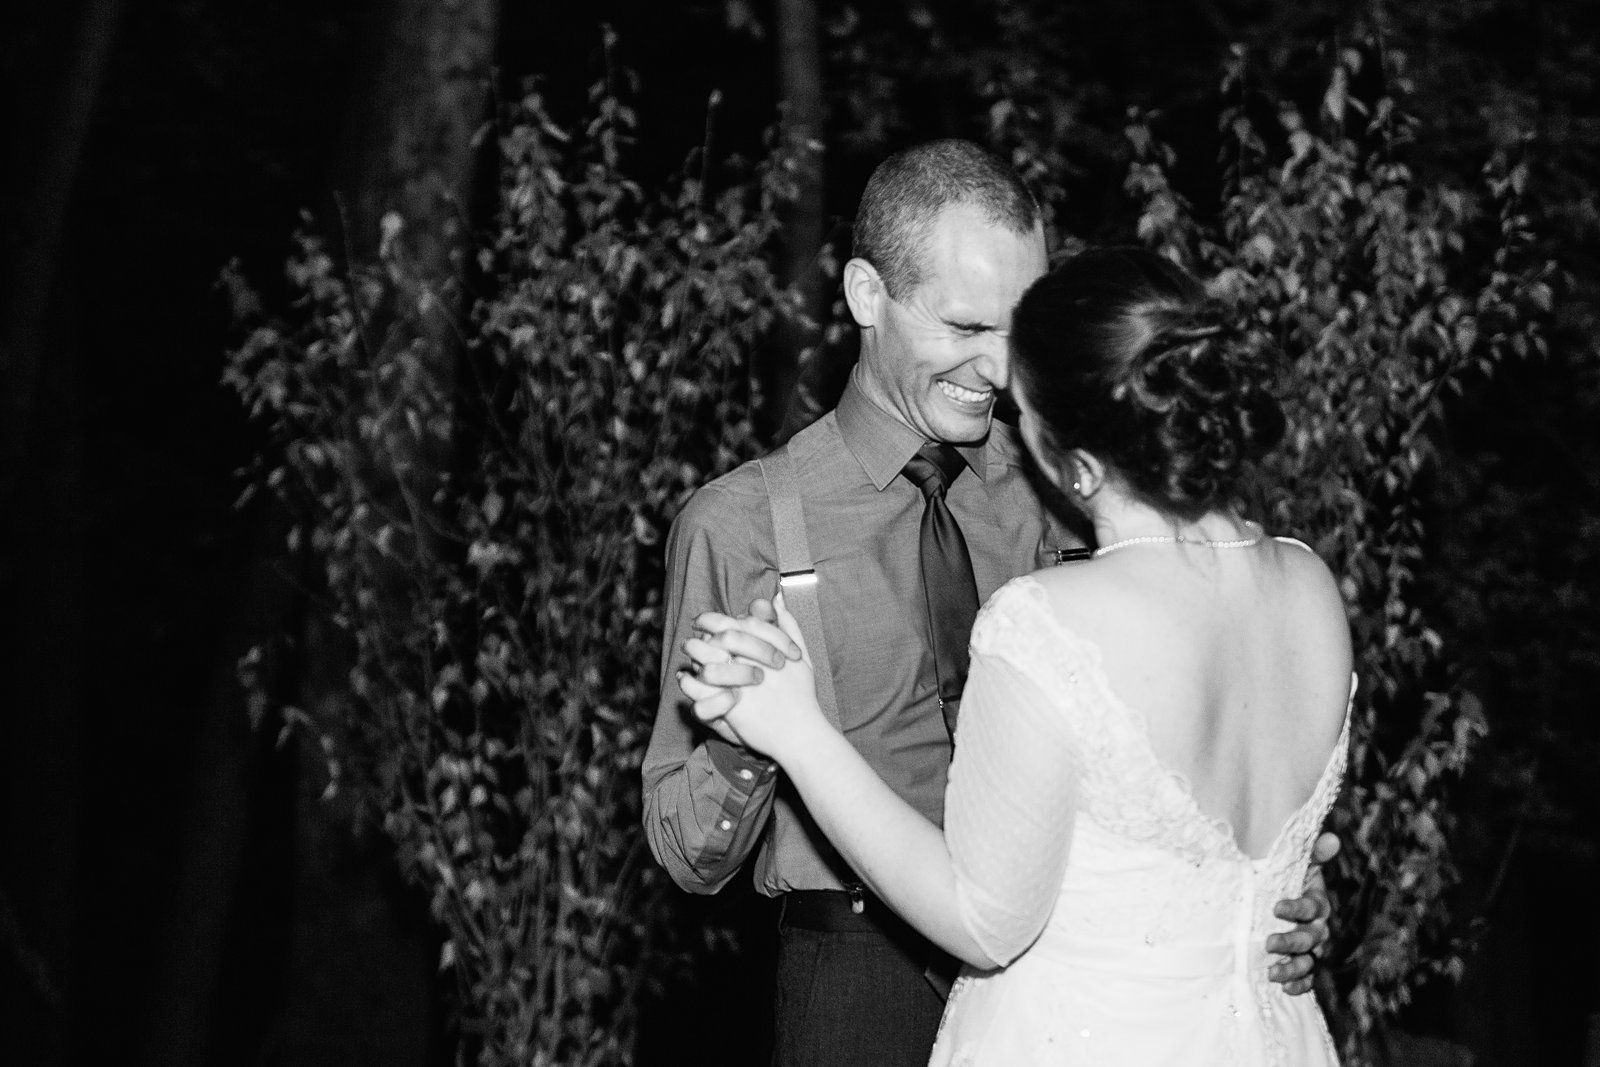 Bride and groom sharing first dance at their L'Auberge de Sedona wedding reception by Arizona wedding photographer PMA Photography.